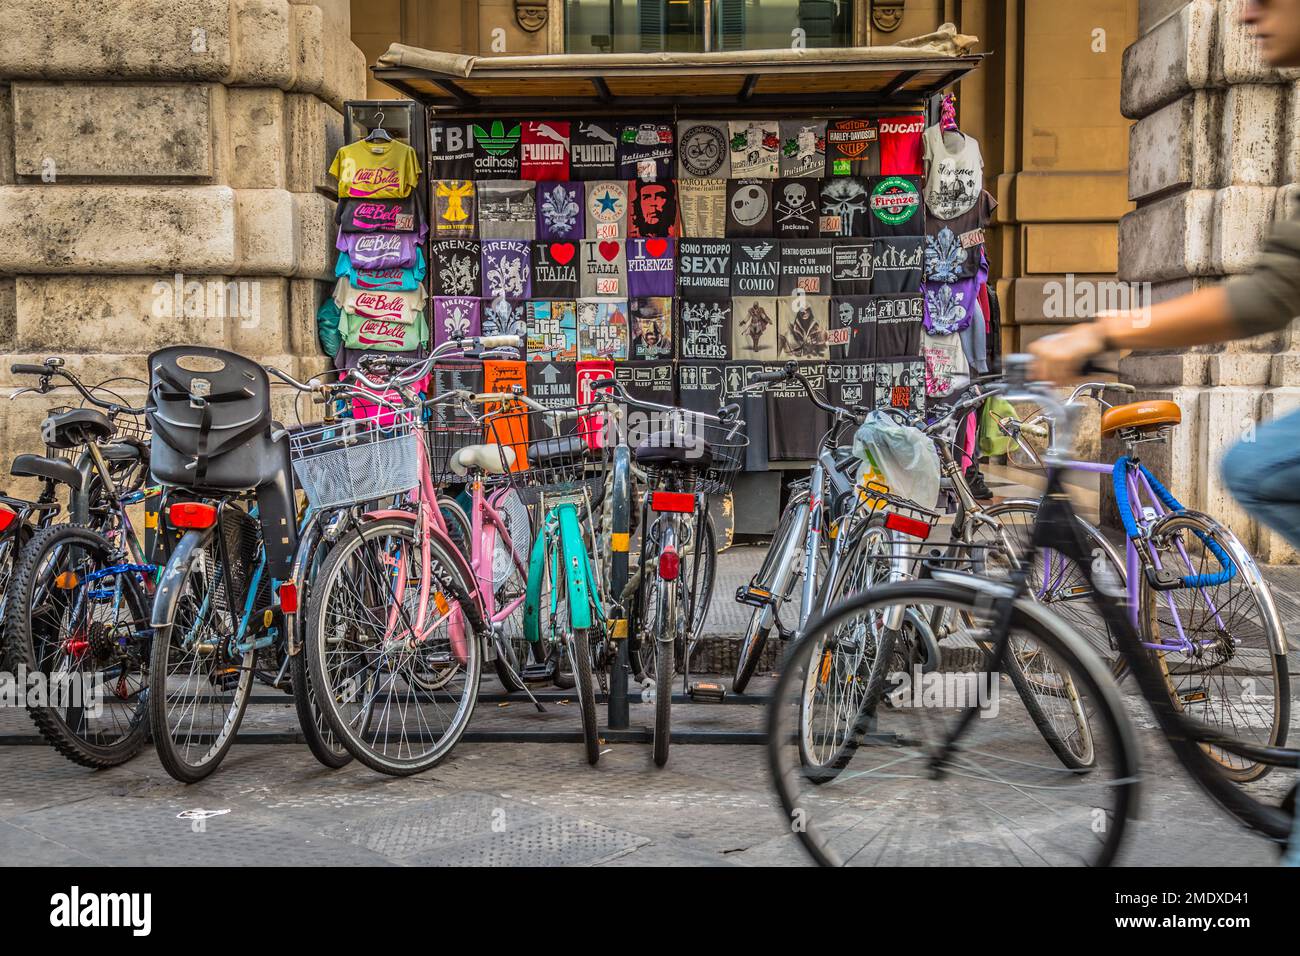 Bicycles parked in front of souvenir t-shirt stand in Florence, Tuscany, Italy. Stock Photo